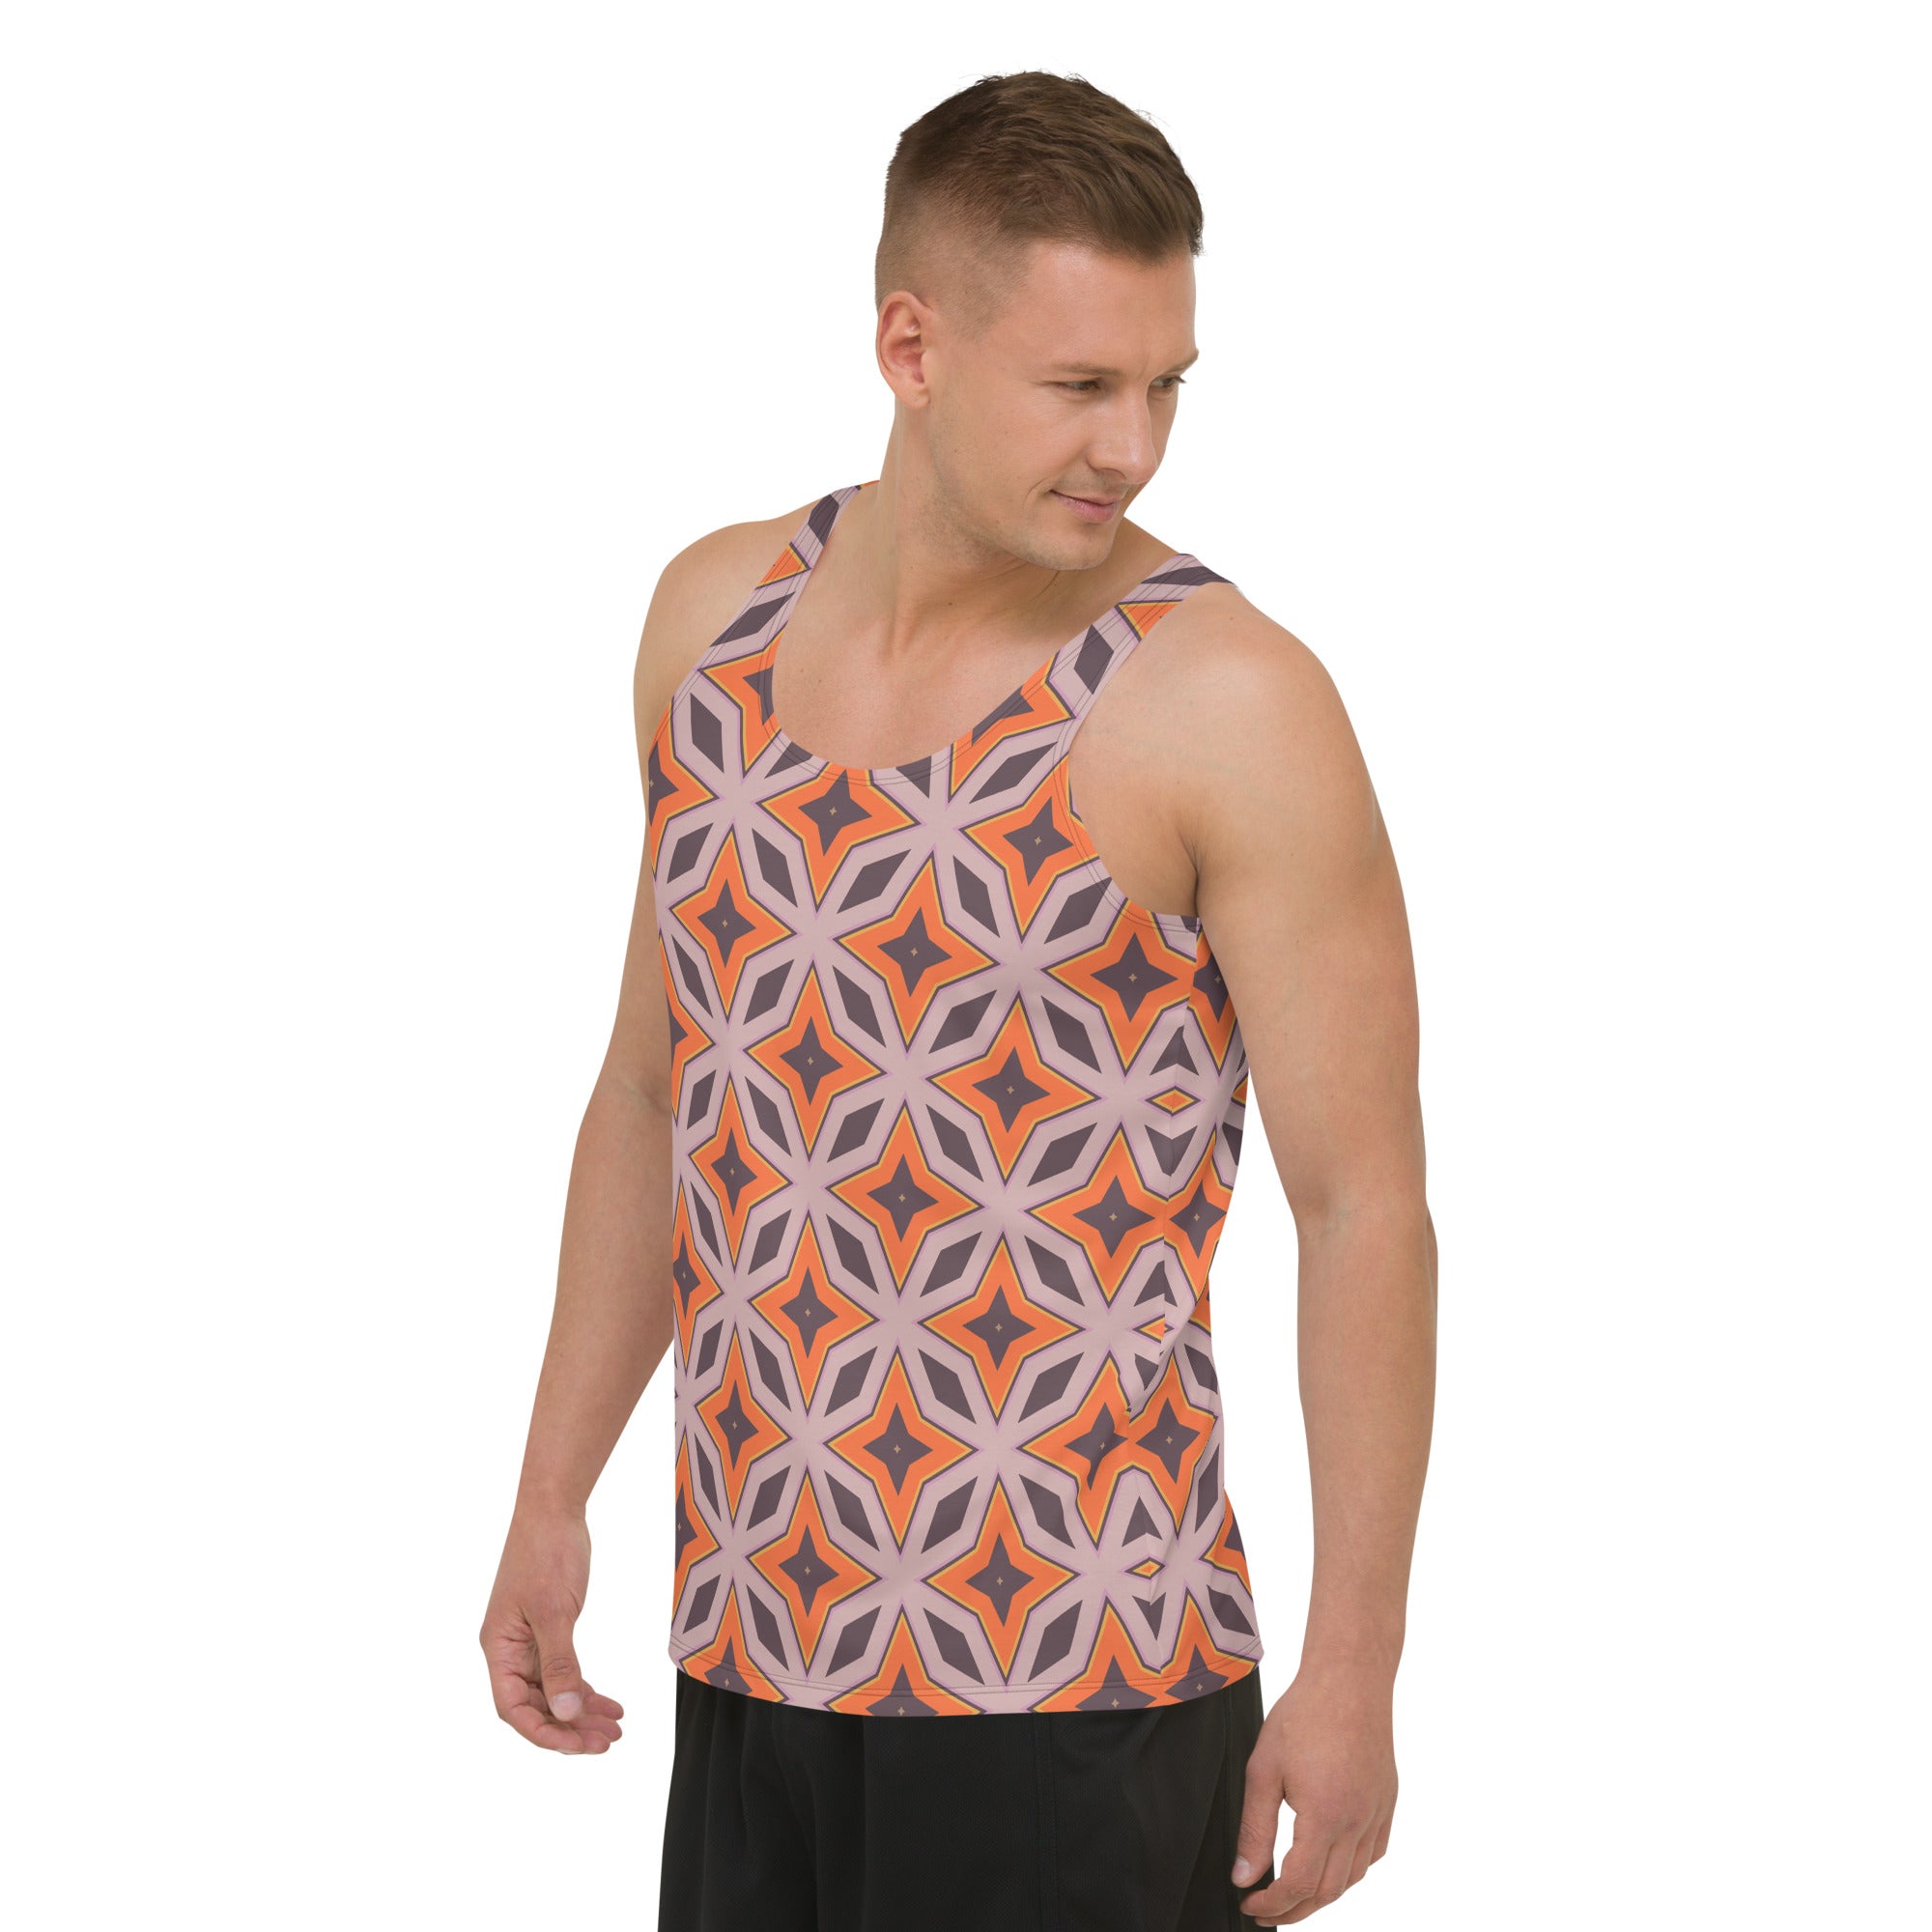 Men's tank top with Aztec patterns in vibrant colors